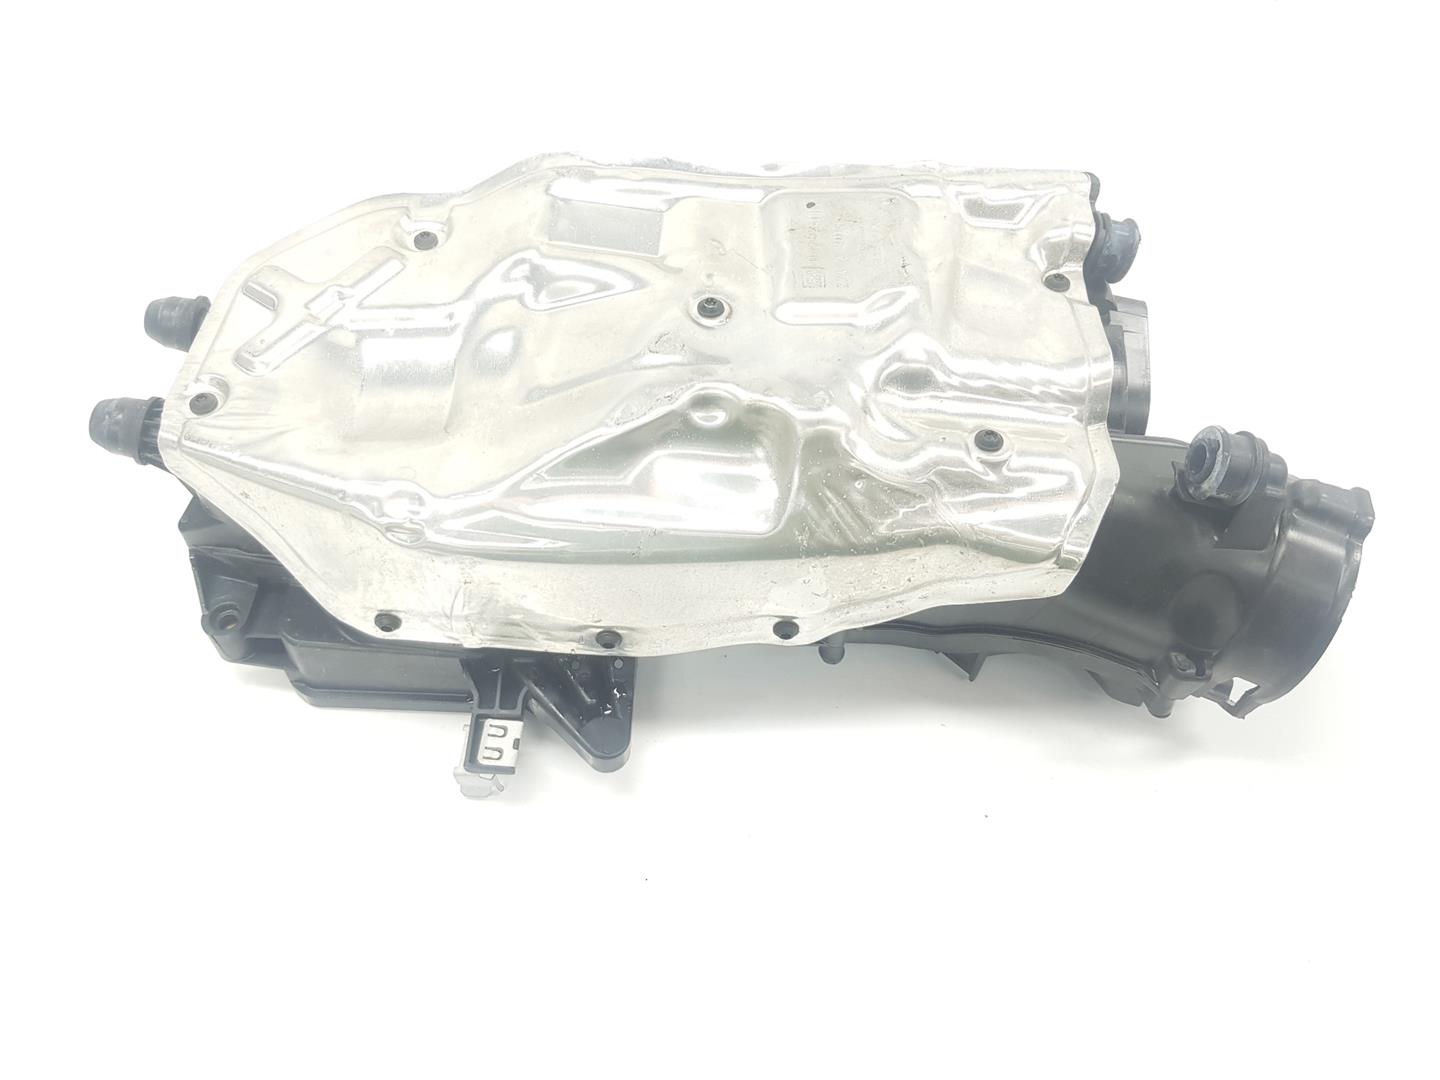 MERCEDES-BENZ C-Class W205/S205/C205 (2014-2023) Other Engine Compartment Parts A6510900600, A6510900600 19777157